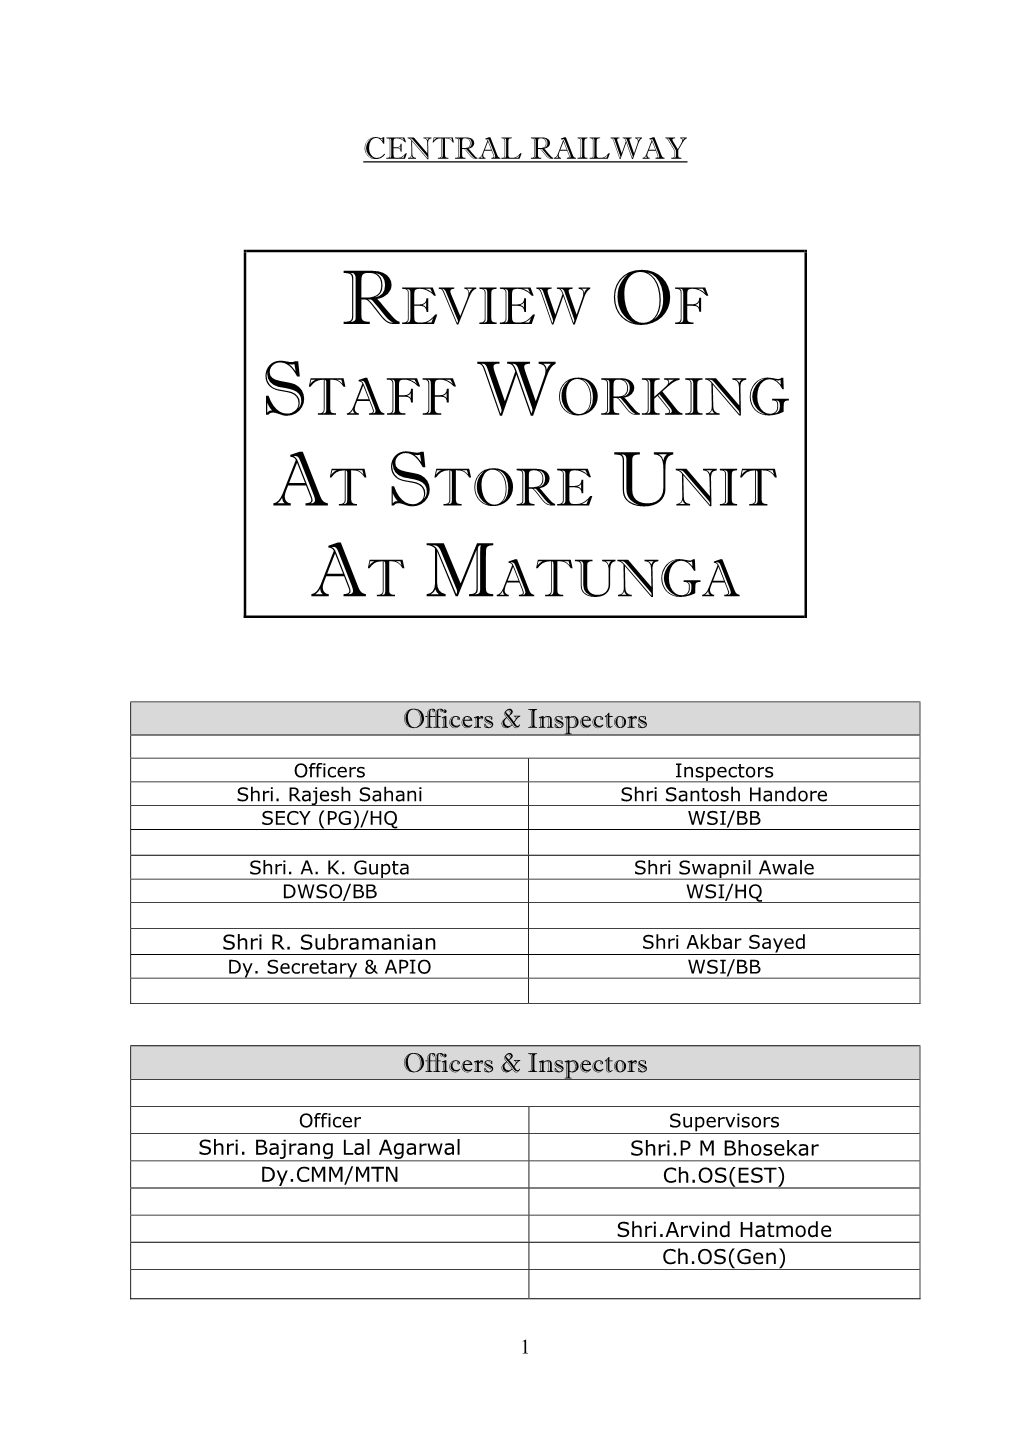 Review of Staff Working at Store Unit at Matunga